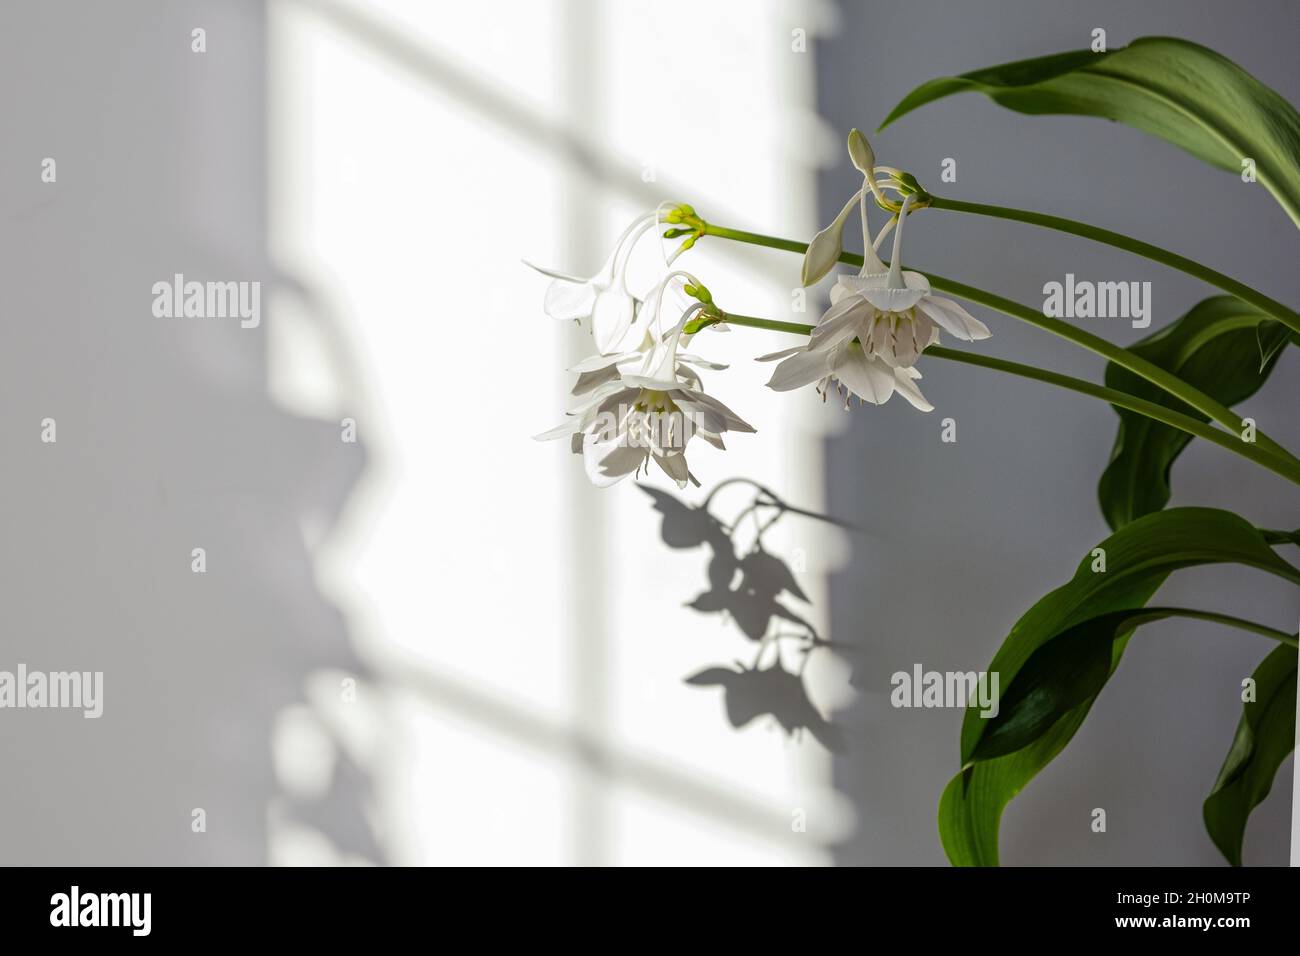 Eucharis green leaves for composition design. Plant in pot tropical leaves background on grey background. Daylight, harsh shadows Stock Photo